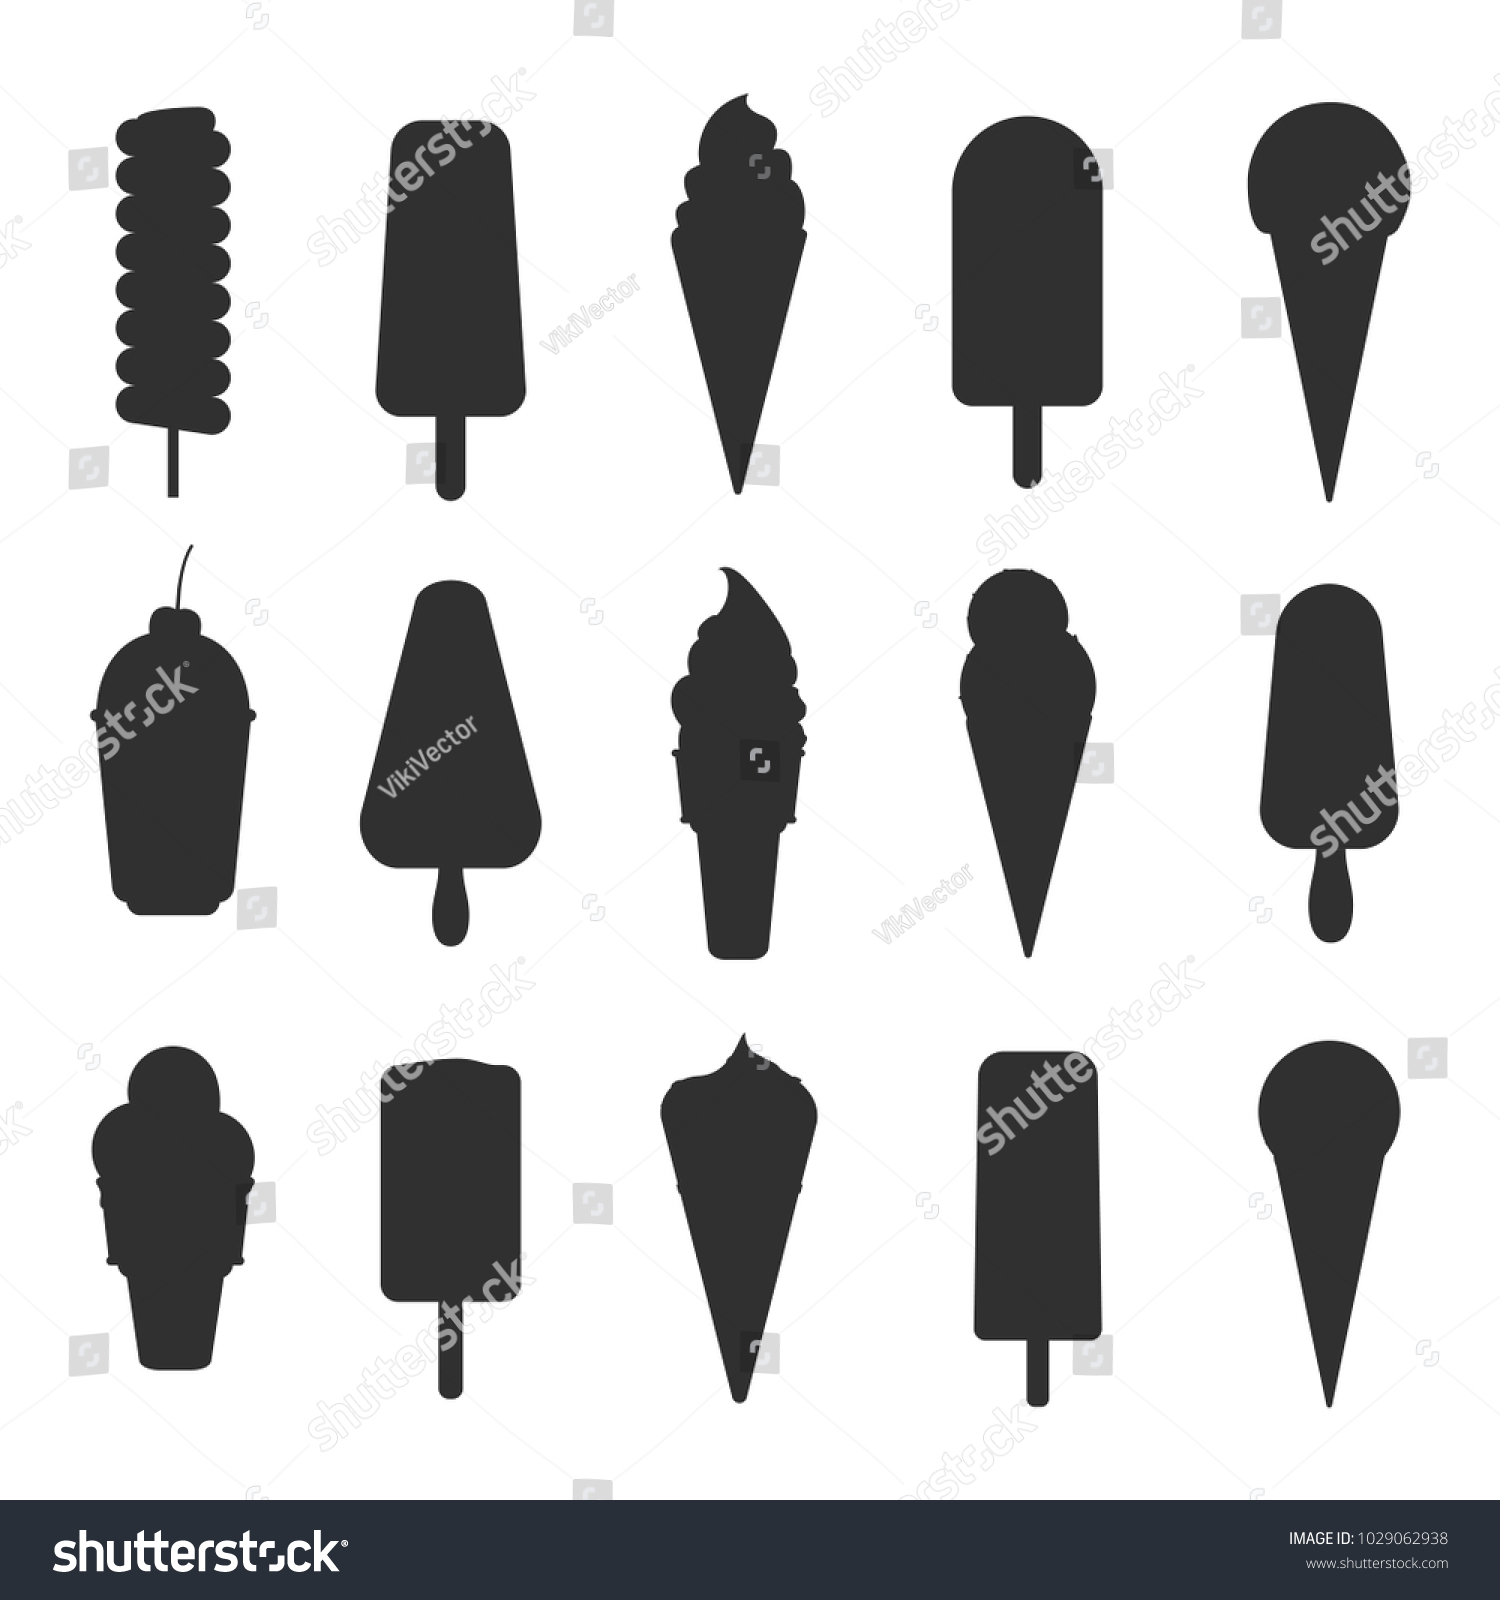 Ice Cream Black Silhouettes Sweet Frozen Stock Vector (Royalty Free ...